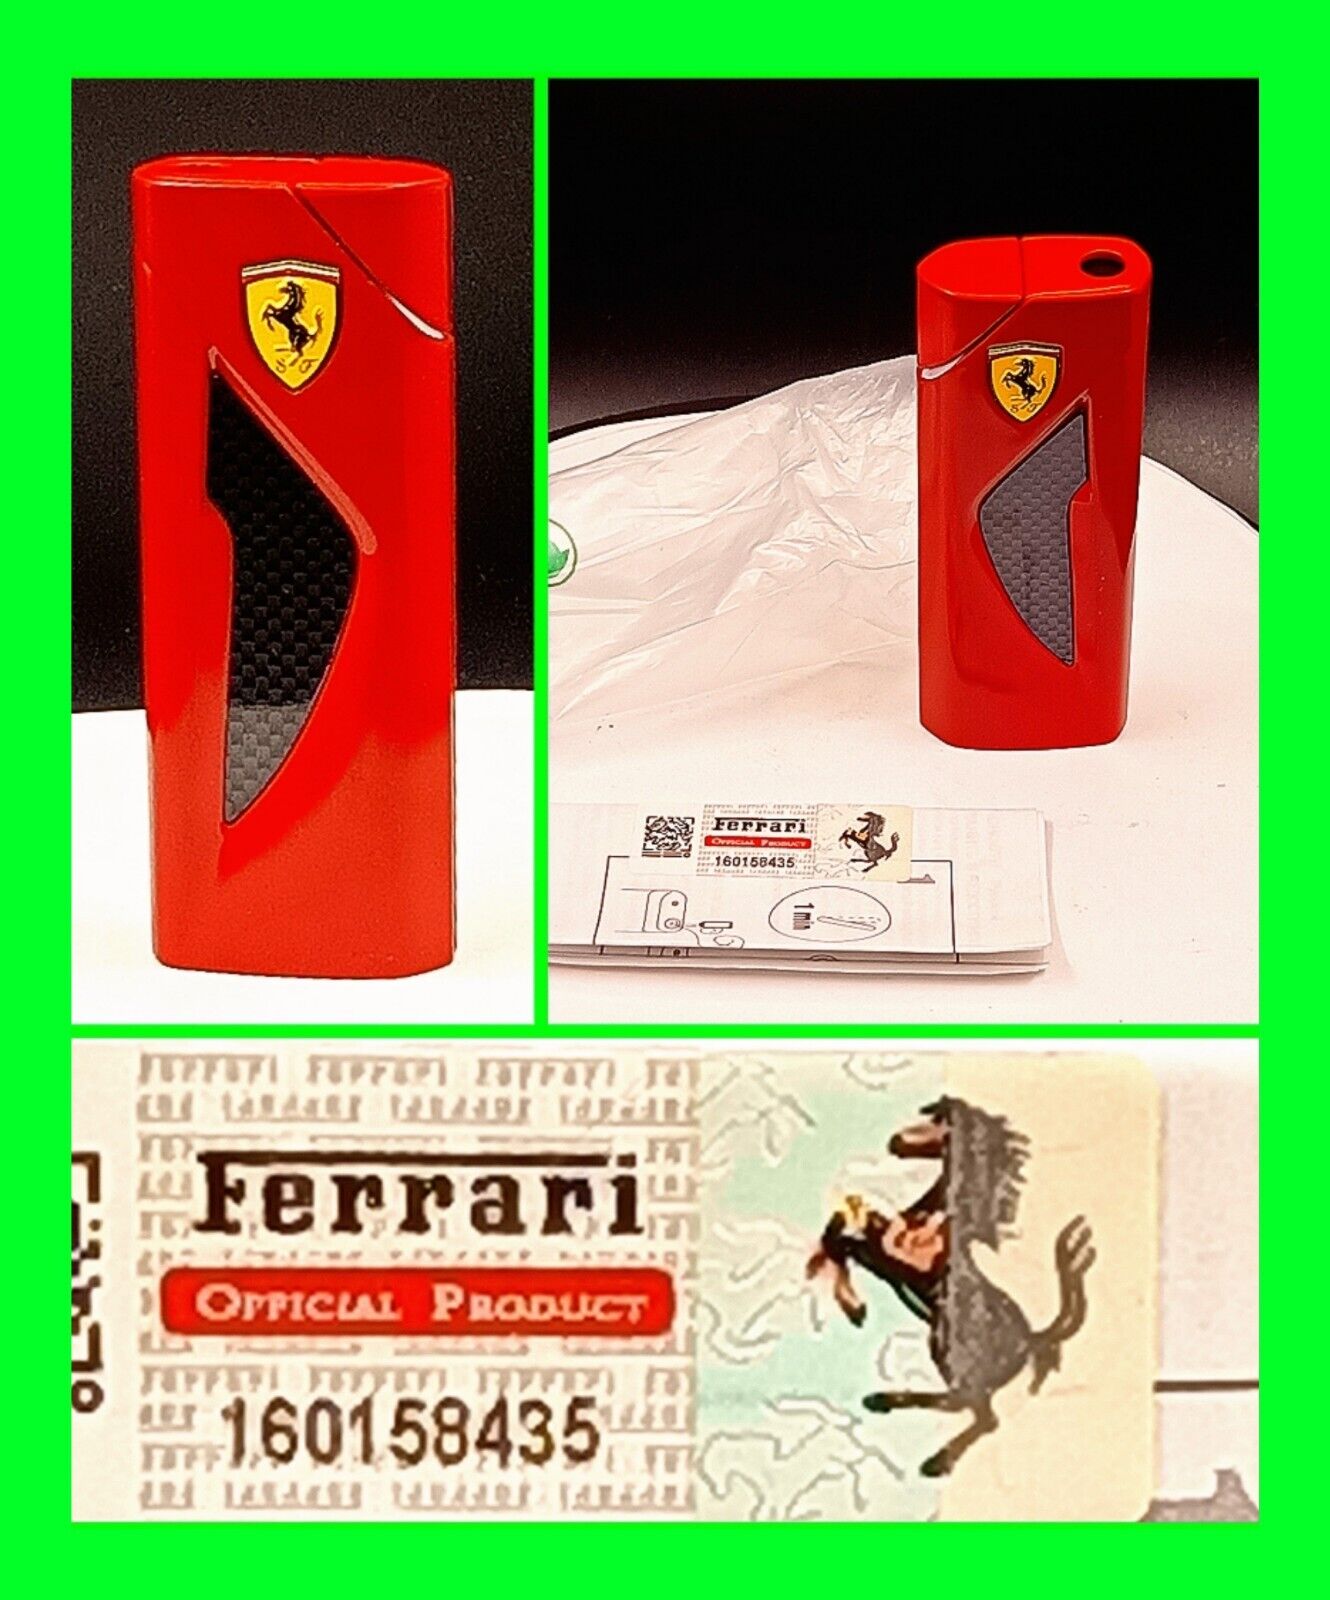 New Limited Edition Ferrari Red Metal Cigarette Lighter w/ Papers ~ REFILLABLE